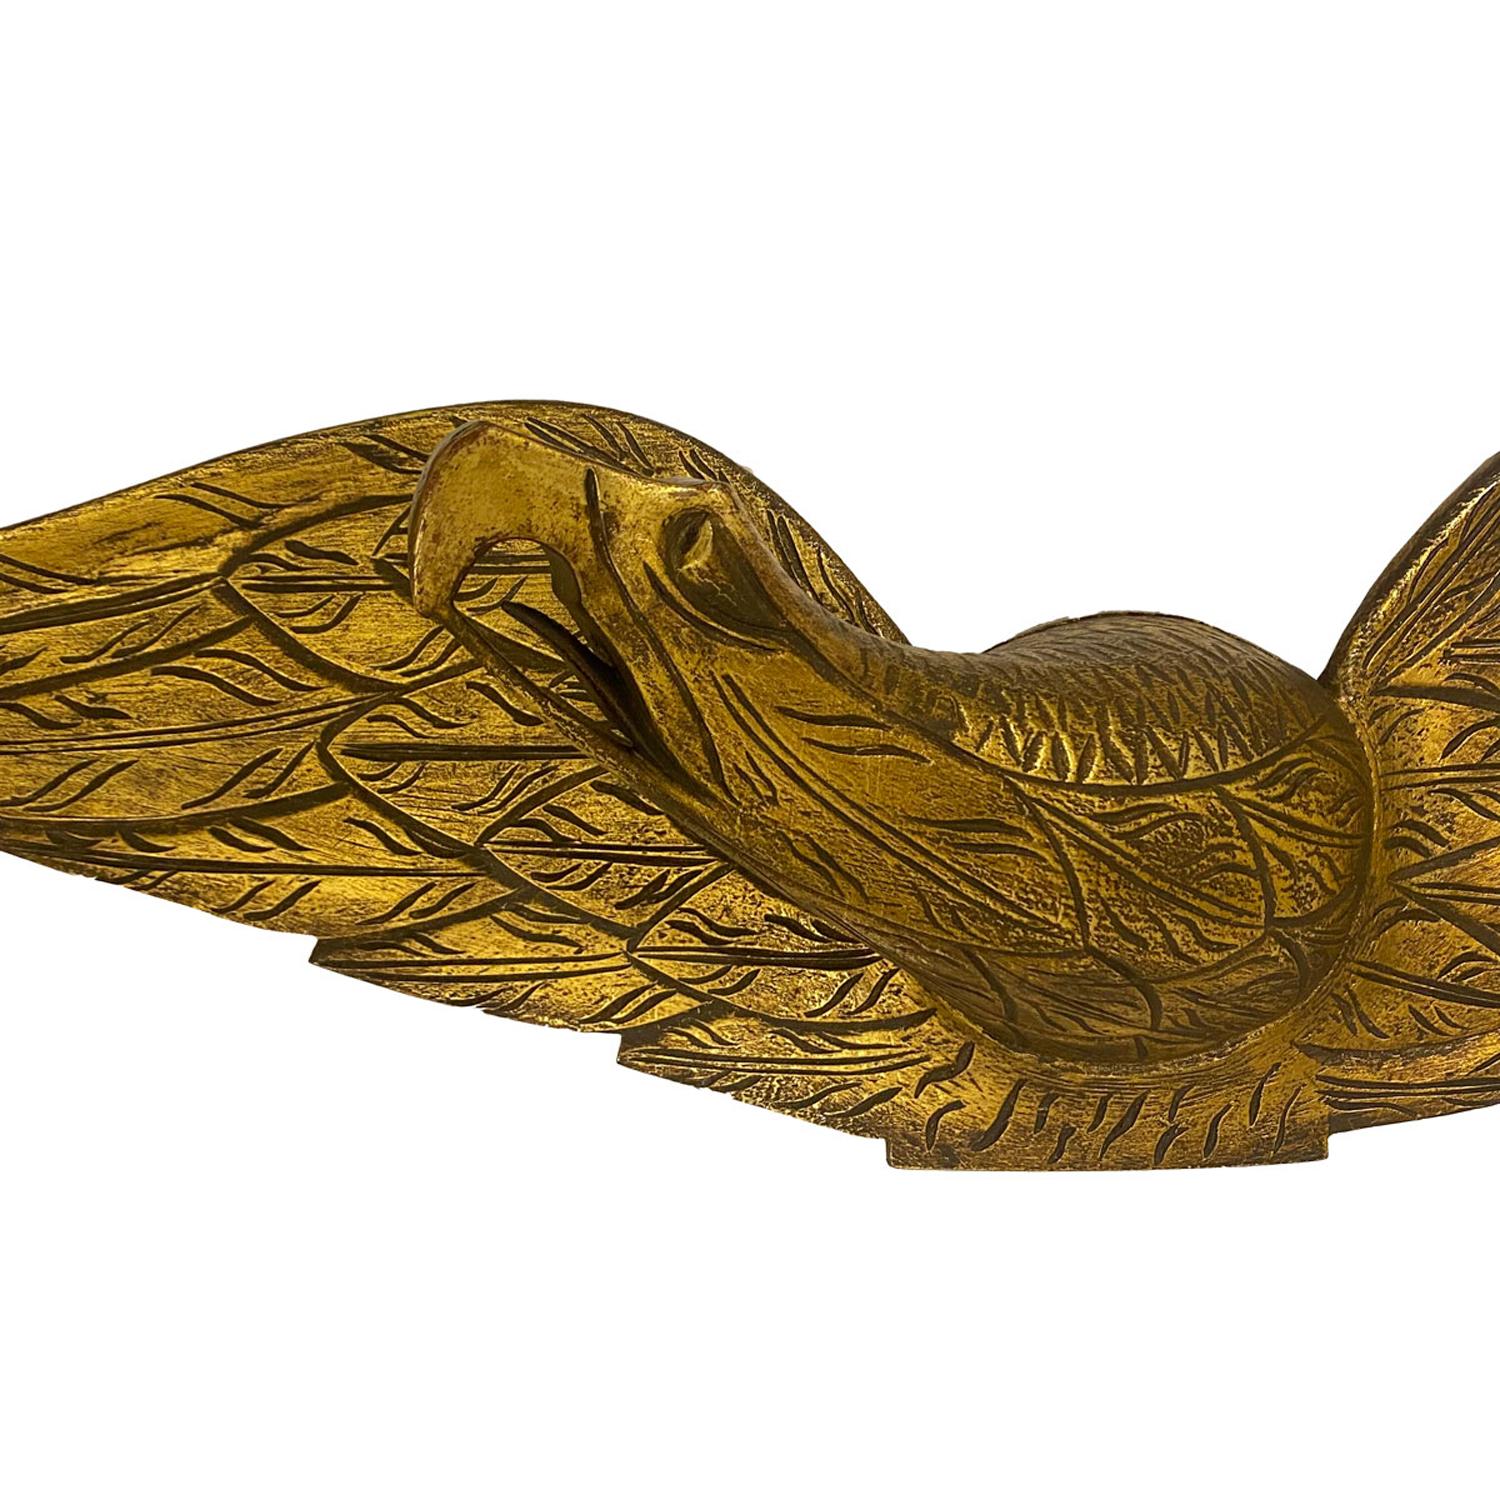 A very good Bellamy style carved and gilded spreadwing eagle, made from Pine, with two piece construction. These type of eagles were made popular by John H Bellamy (1836-1914), that were used decoratively for ships and homes.
With a warm gilded